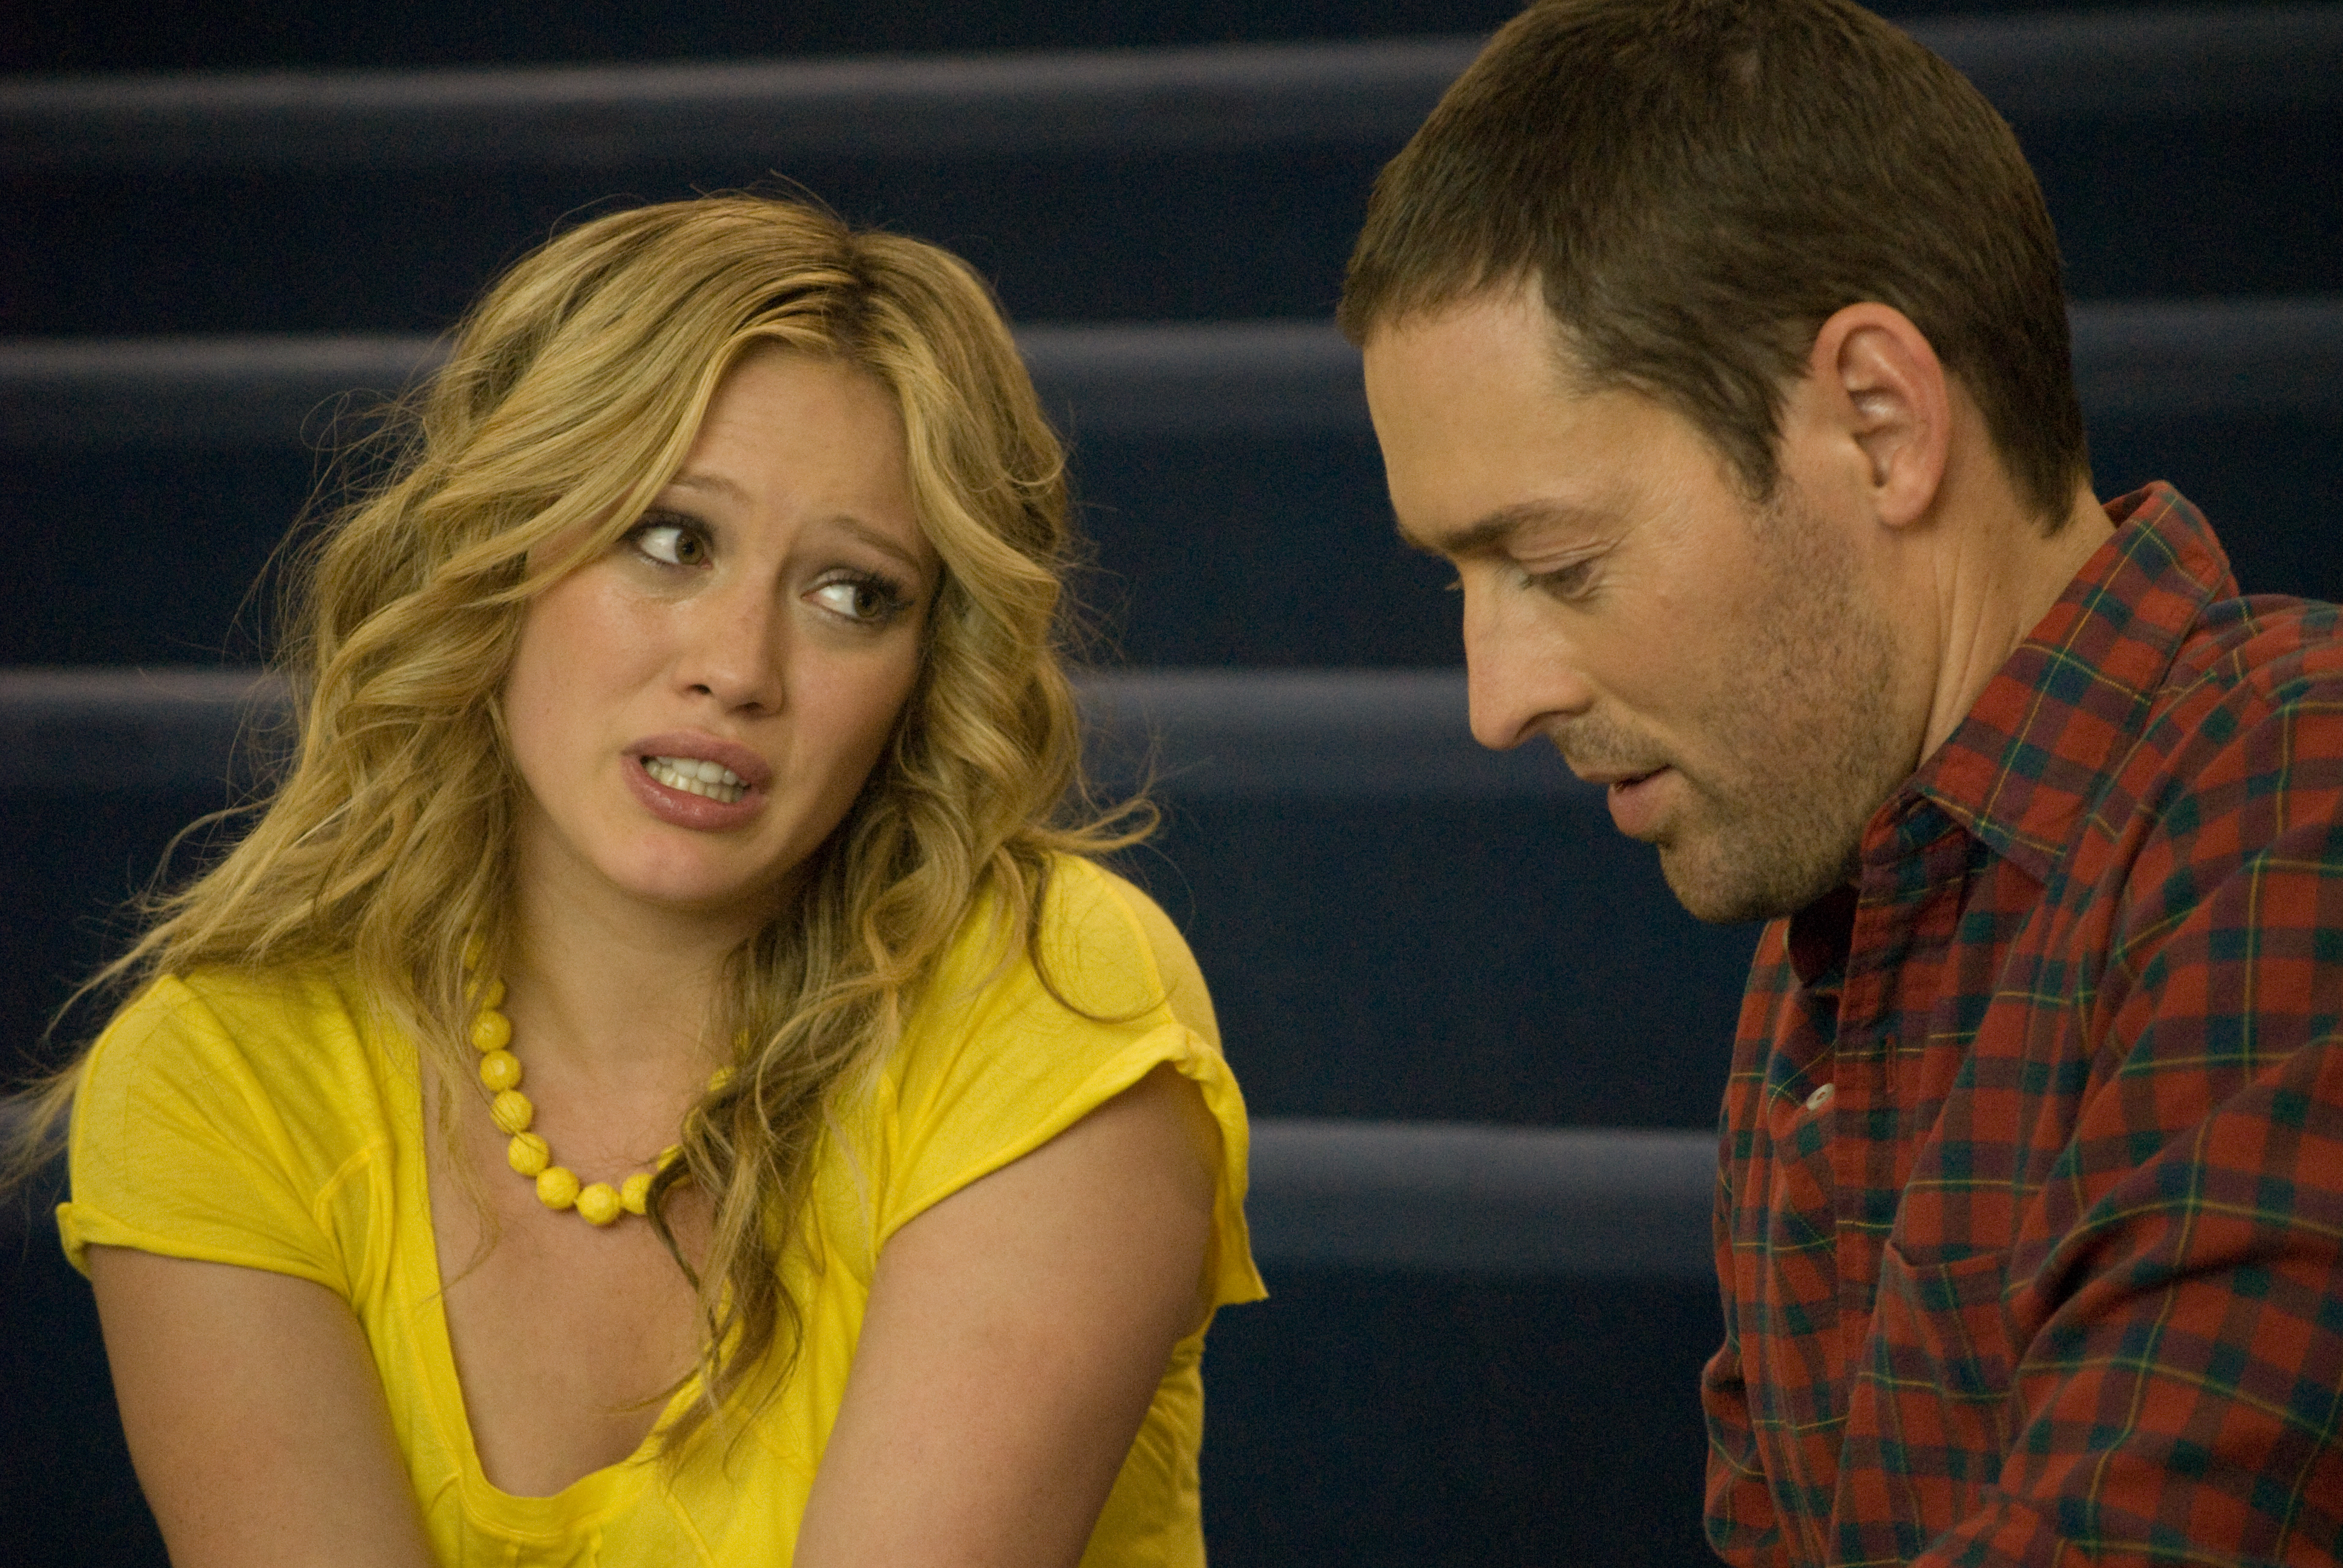 Hilary Duff and Mark Polish on STAY COOL